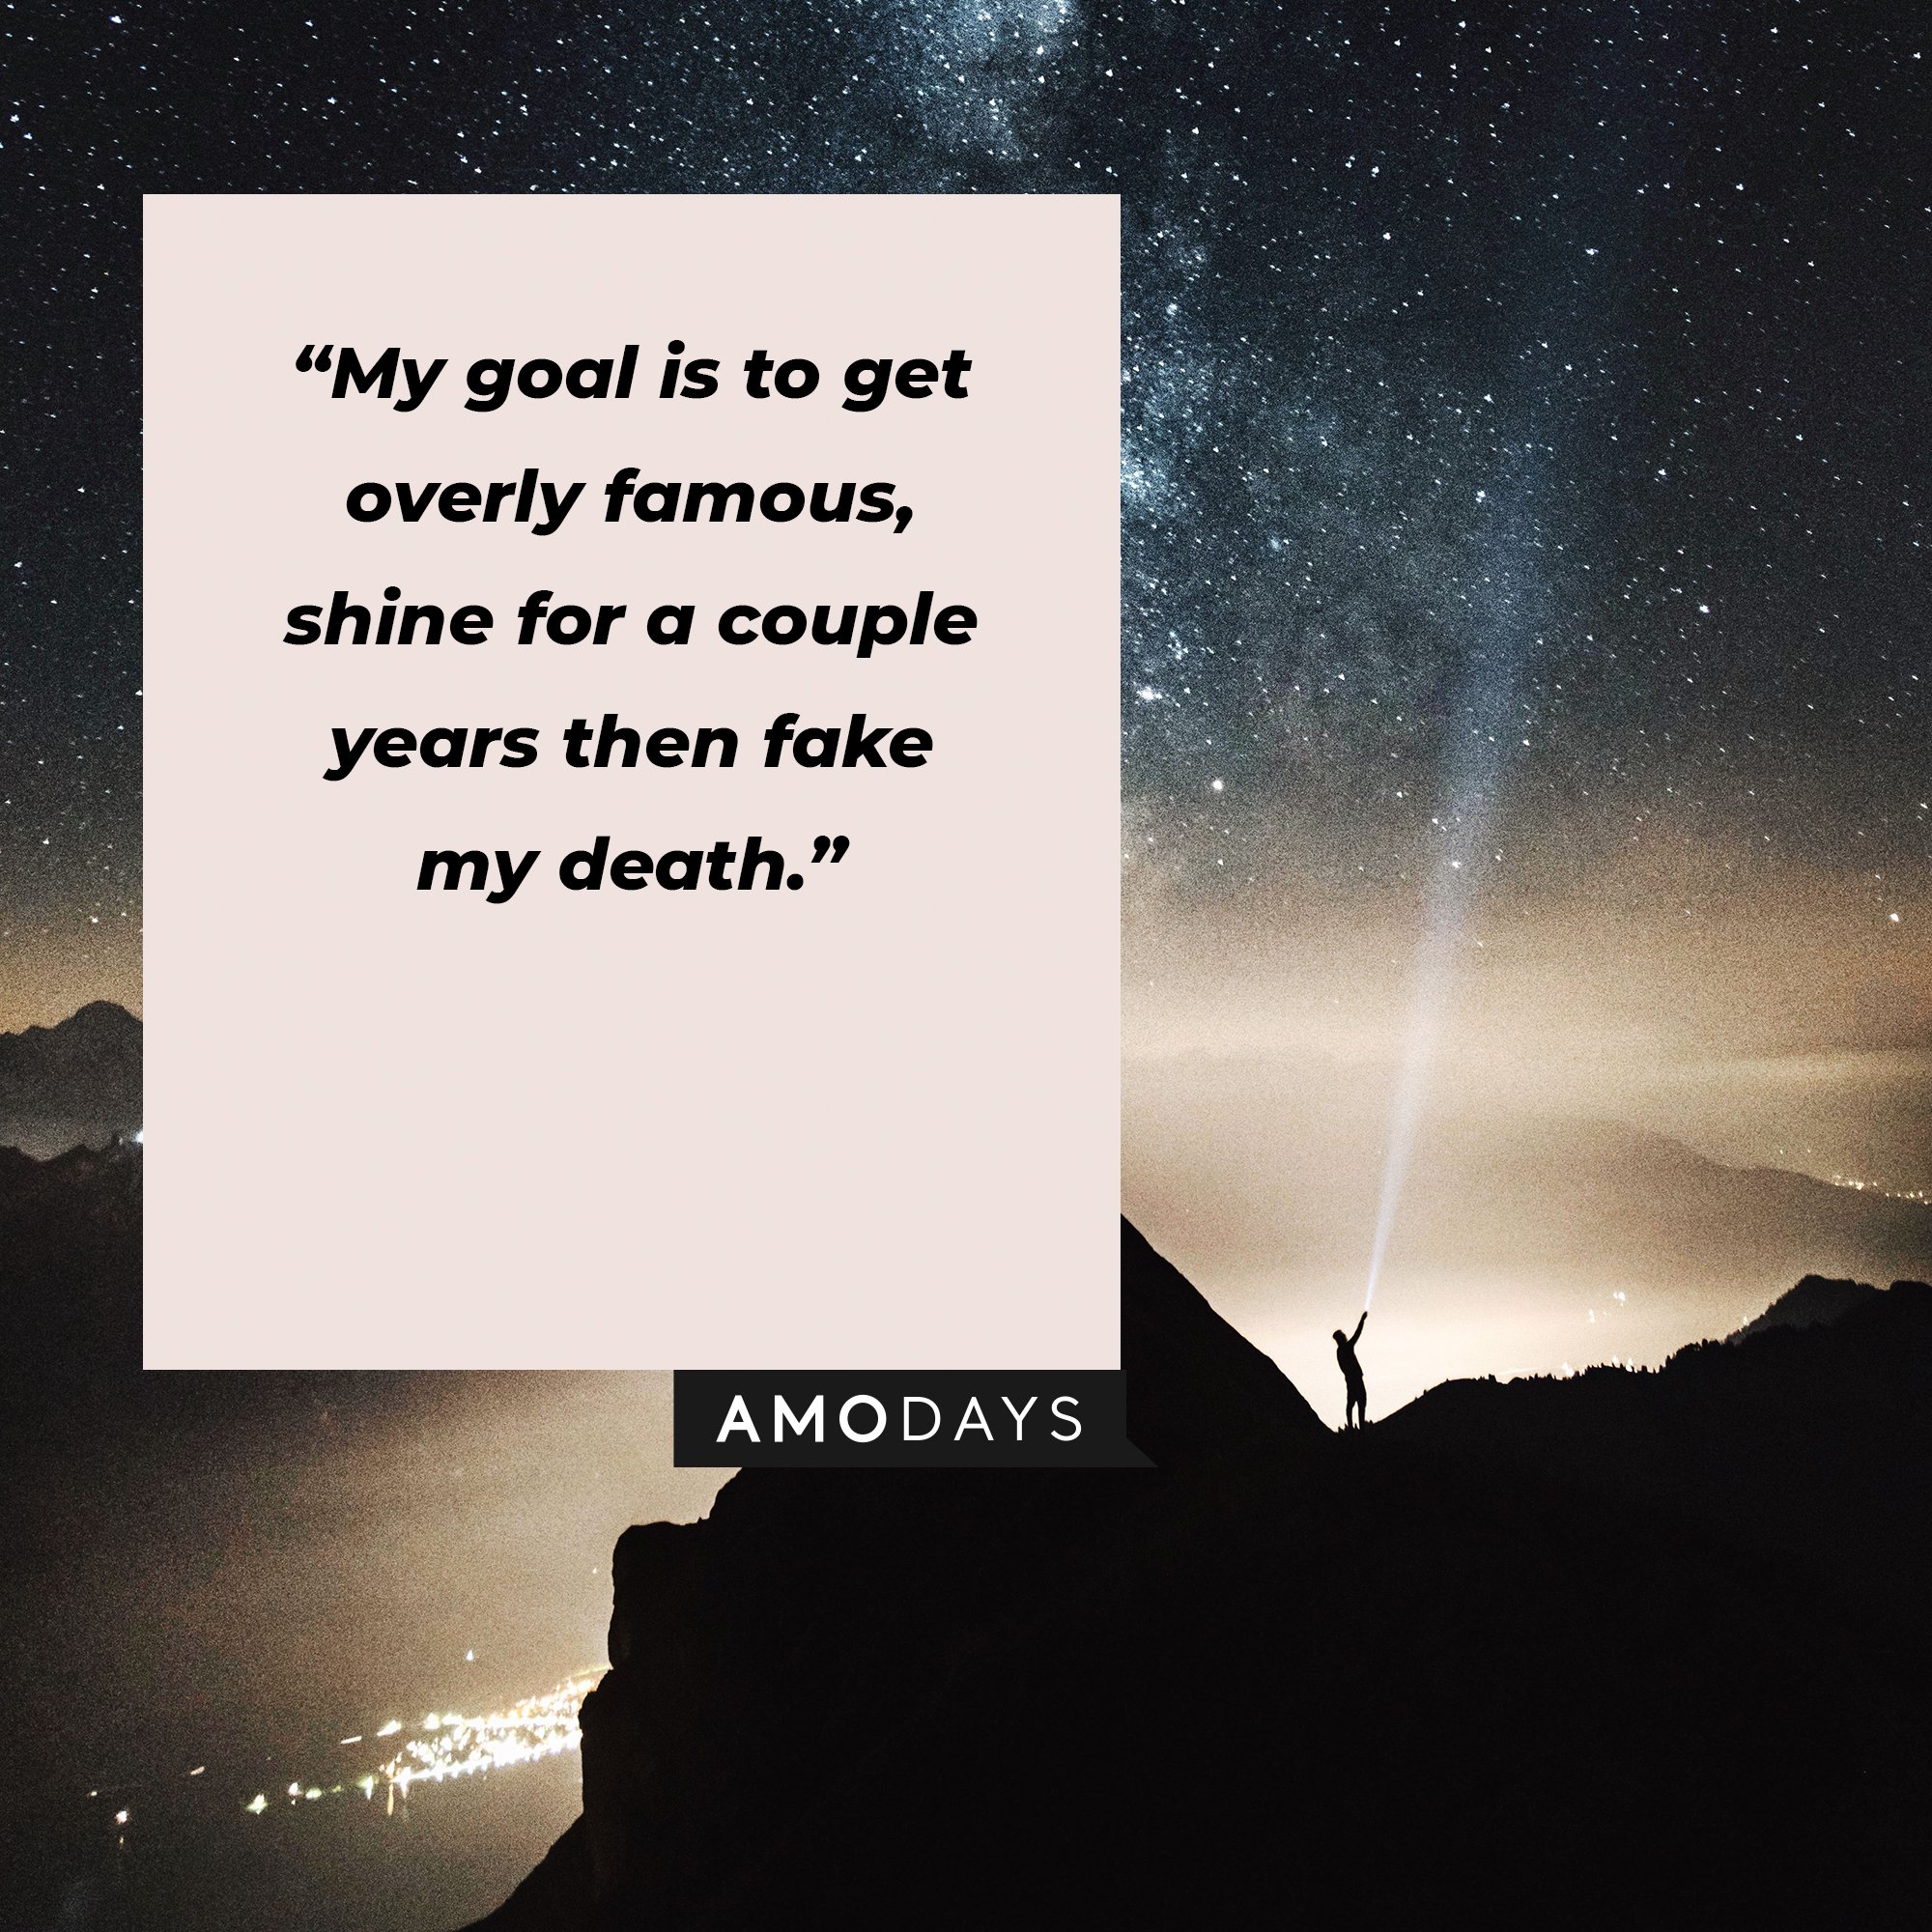 Juice WRLD’s quote: “My goal is to get overly famous, shine for a couple years then fake my death.” | Image: AmoDays